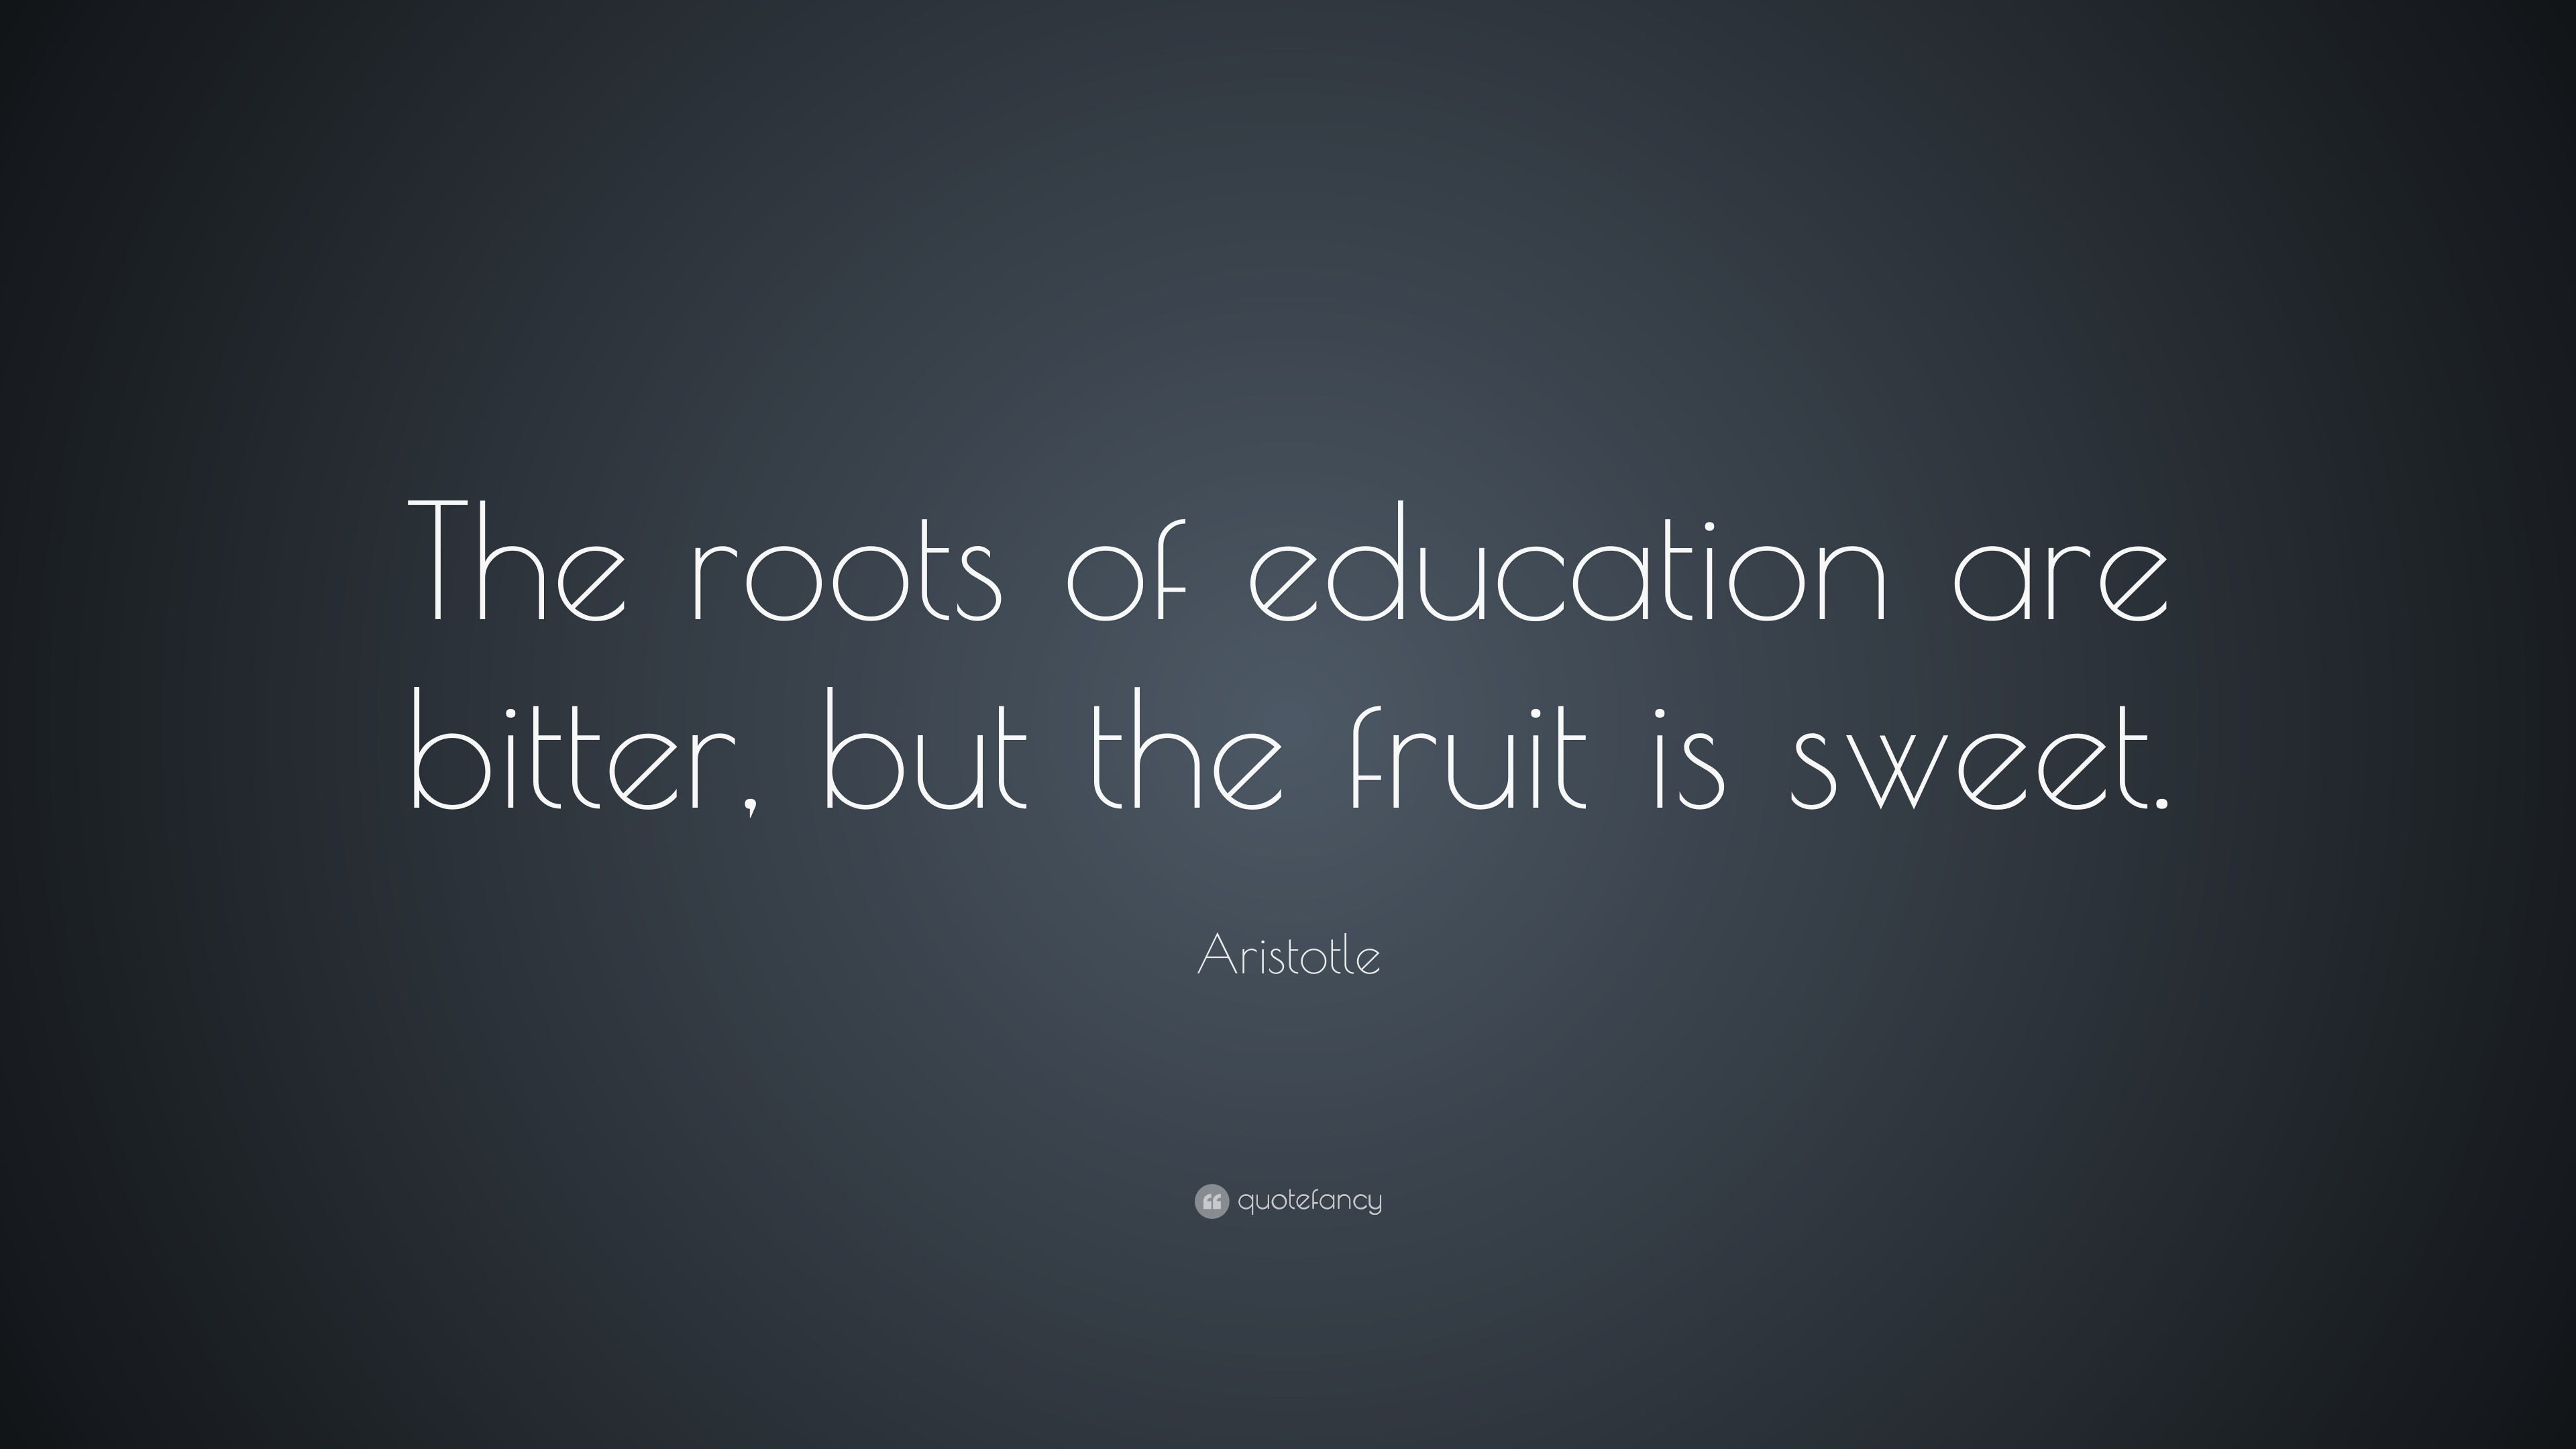 Aristotle Quotes On Education
 Aristotle Quote “The roots of education are bitter but